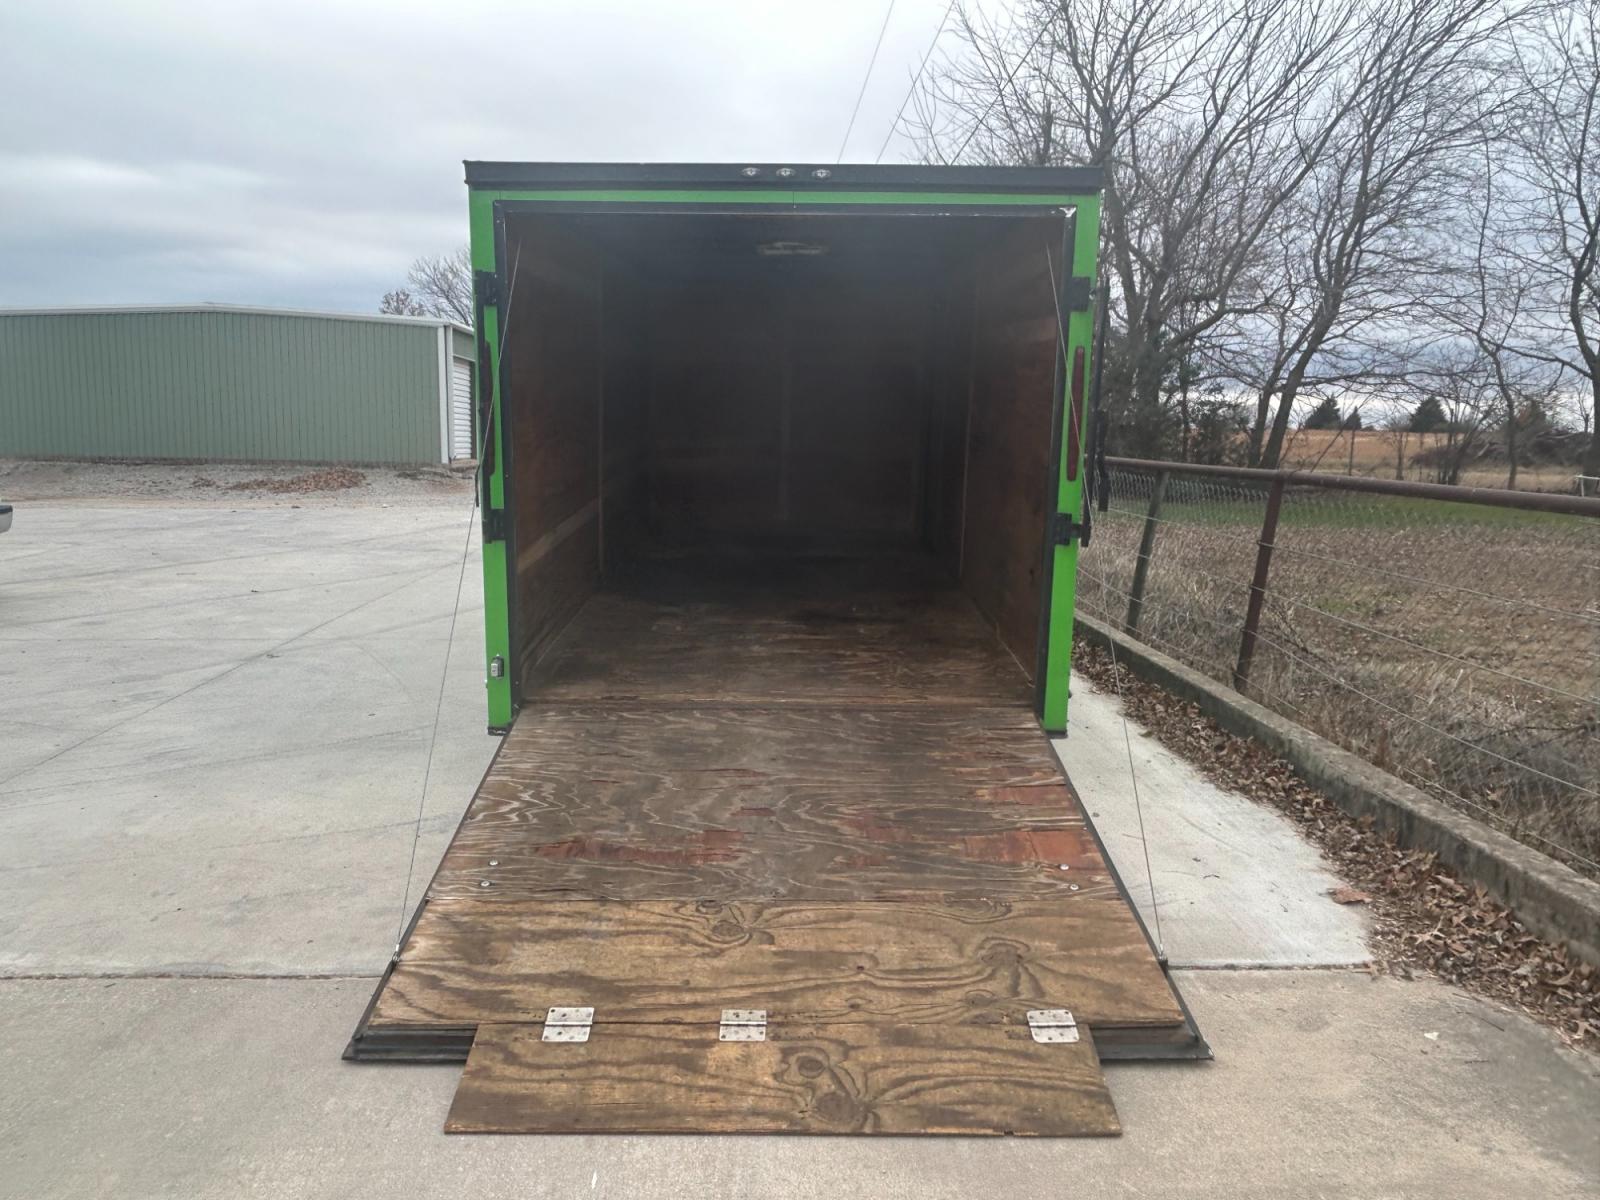 2020 GREEN /TAN DEEP SOUTH ENCLOSED TRAILER (7JKBE1624LH) , located at 17760 Hwy 62, Morris, OK, 74445, 35.609104, -95.877060 - 2020 DEEP SOUTH ENCLOSED TRAILER. THIS TRAILER IS 12 X 6.5 FT. ***MINOR DAMAGES AS SHOWN IN PICTURES*** ***WE RECOMMEND THAT THE TIRES TO BE REPLACED*** WE CAN REPLACE THE TIRES FOR AN ADDITIONAL $400 $5,500 - Photo #3